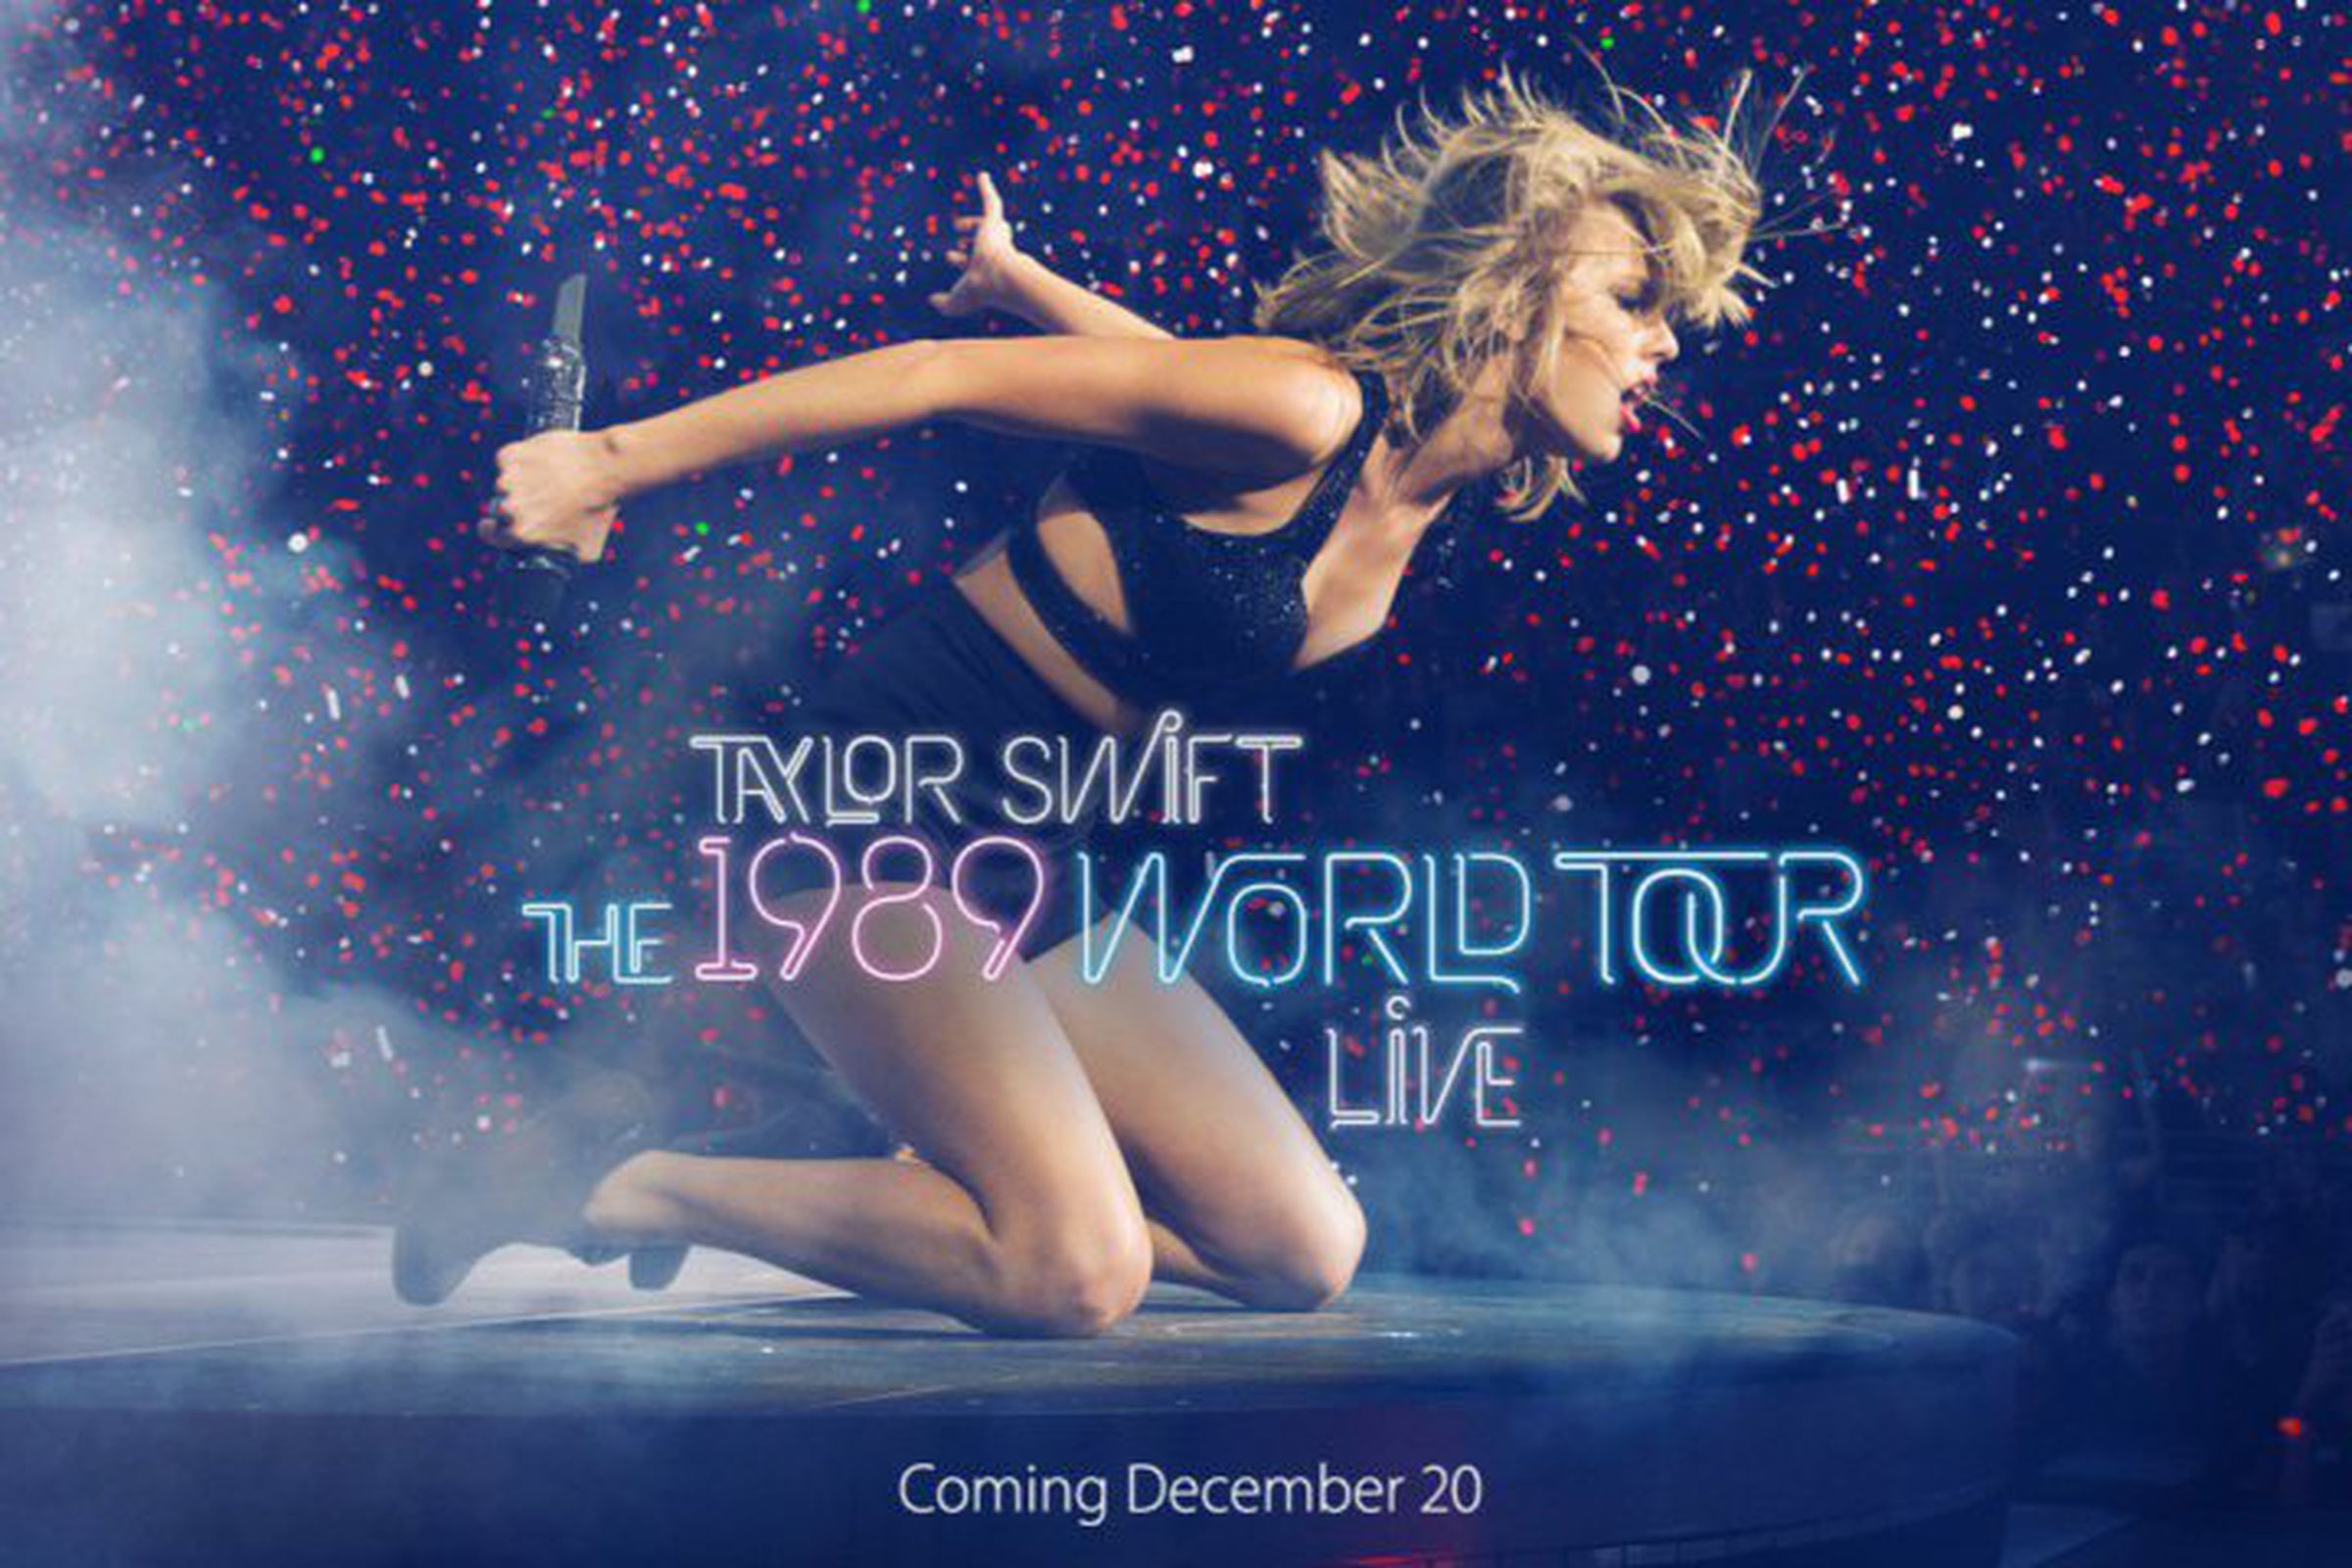 where to watch 1989 tour